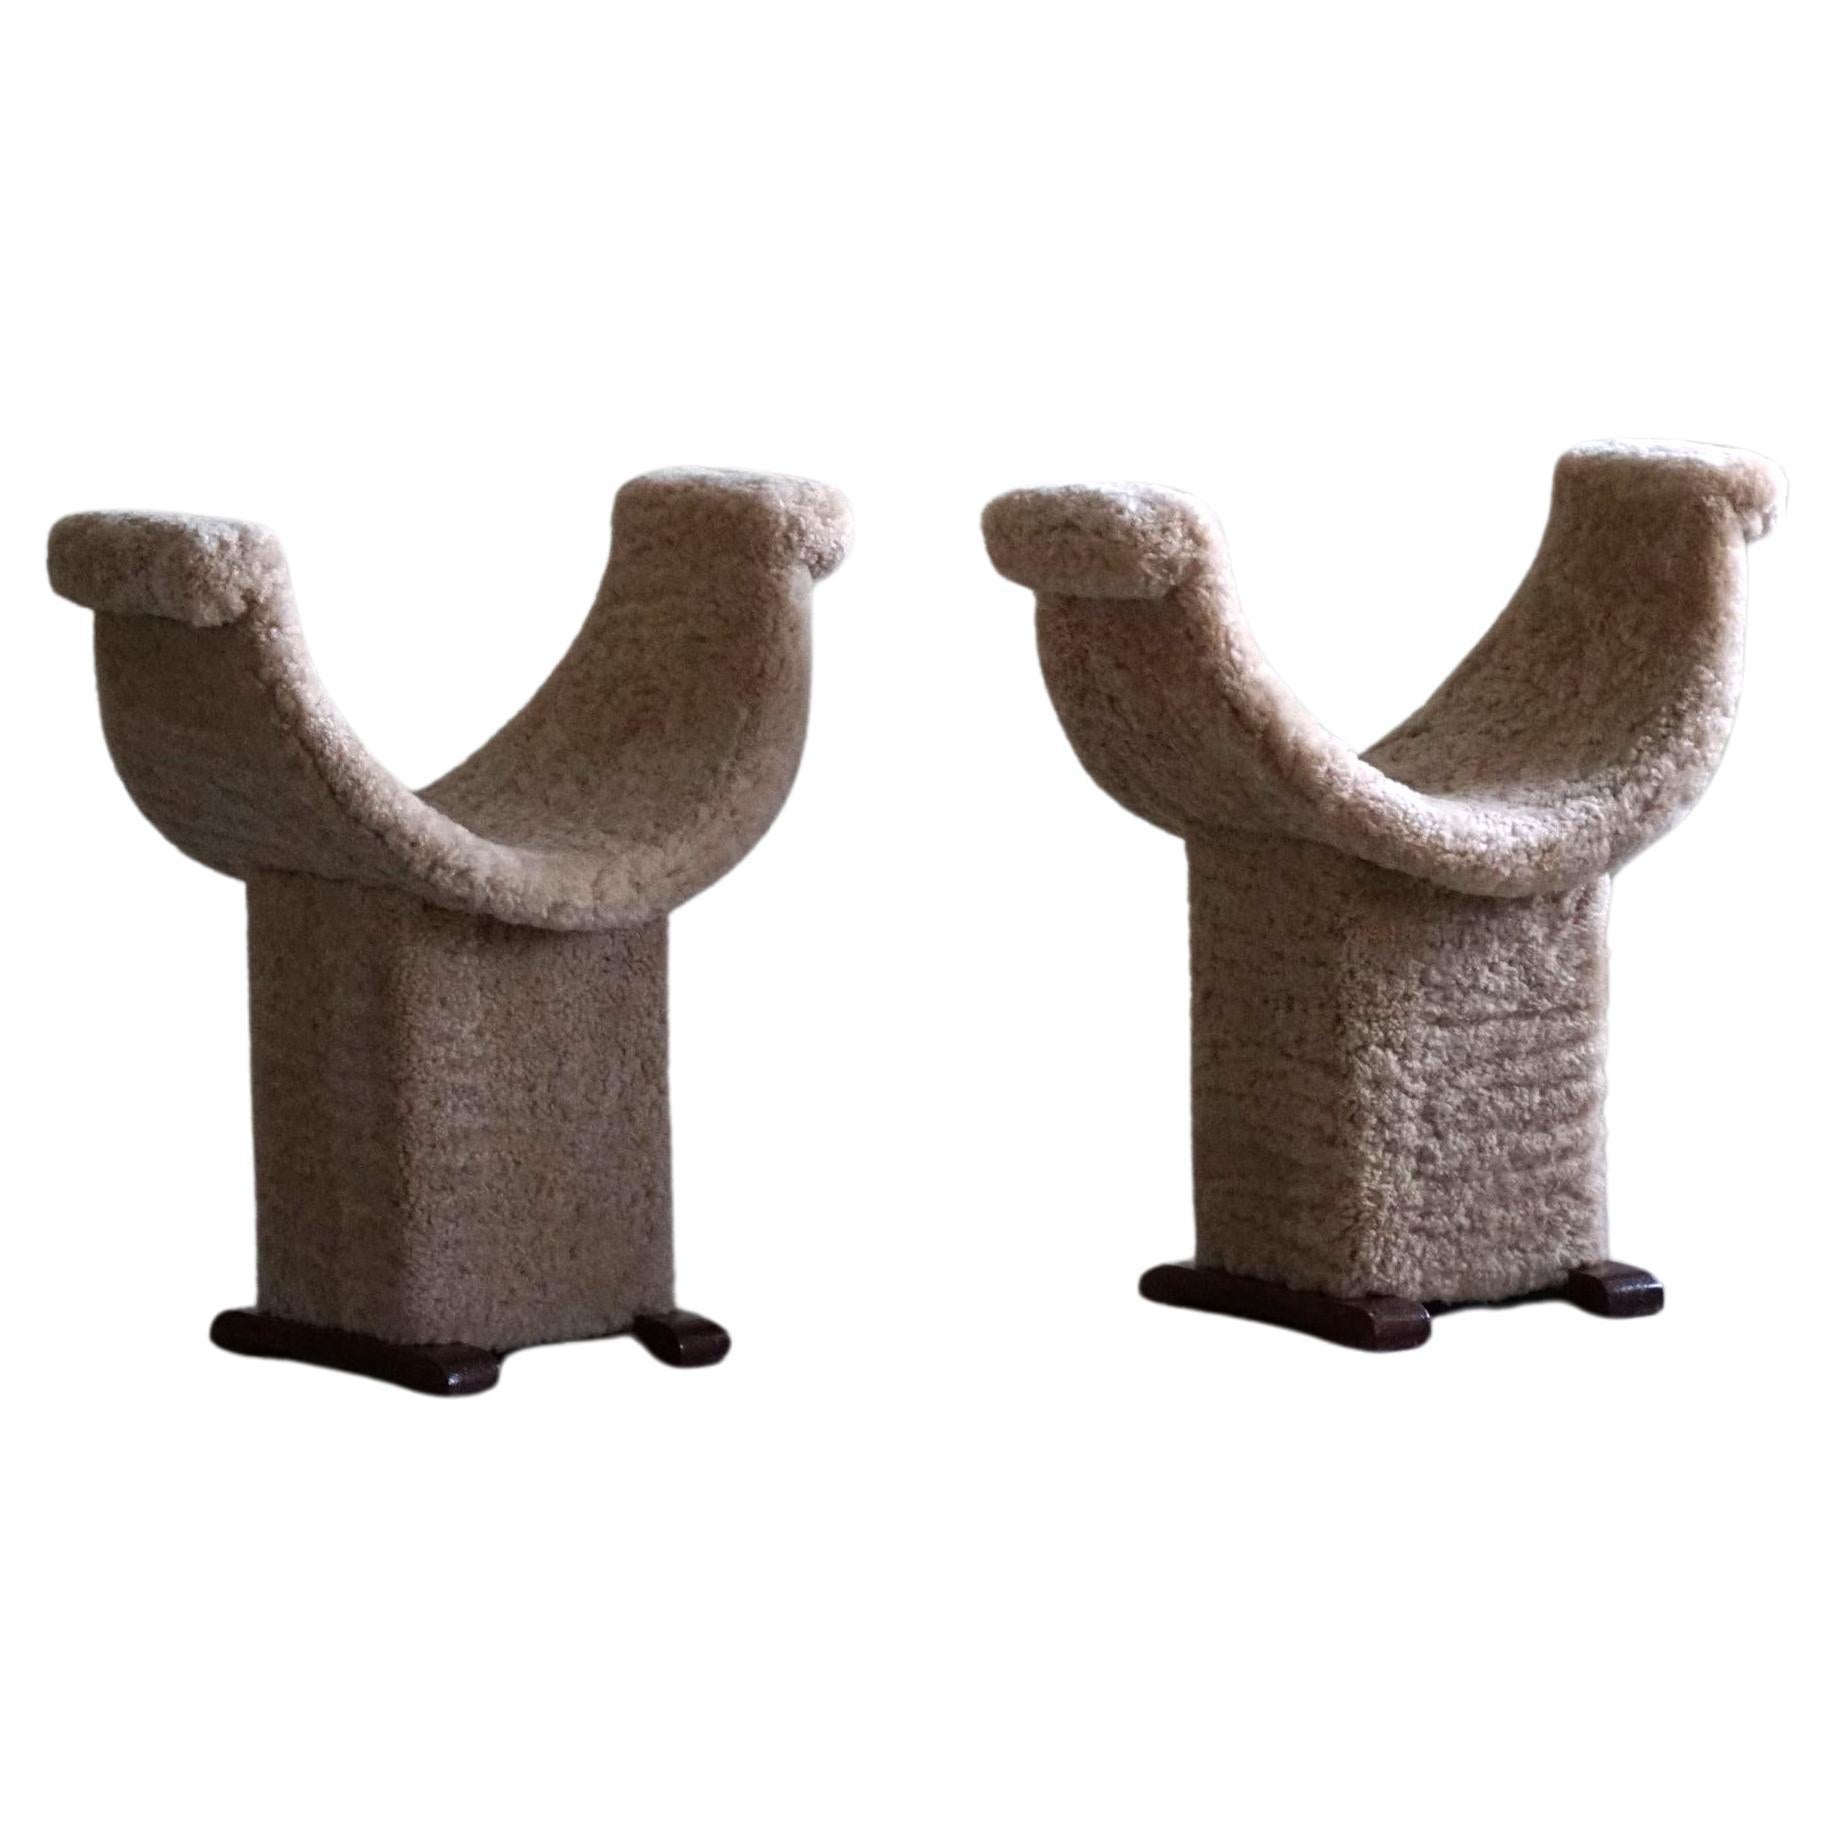 A Pair of Sculptural Stools, Reupholstered in Lambswool, Spanish Modern, 1940s For Sale